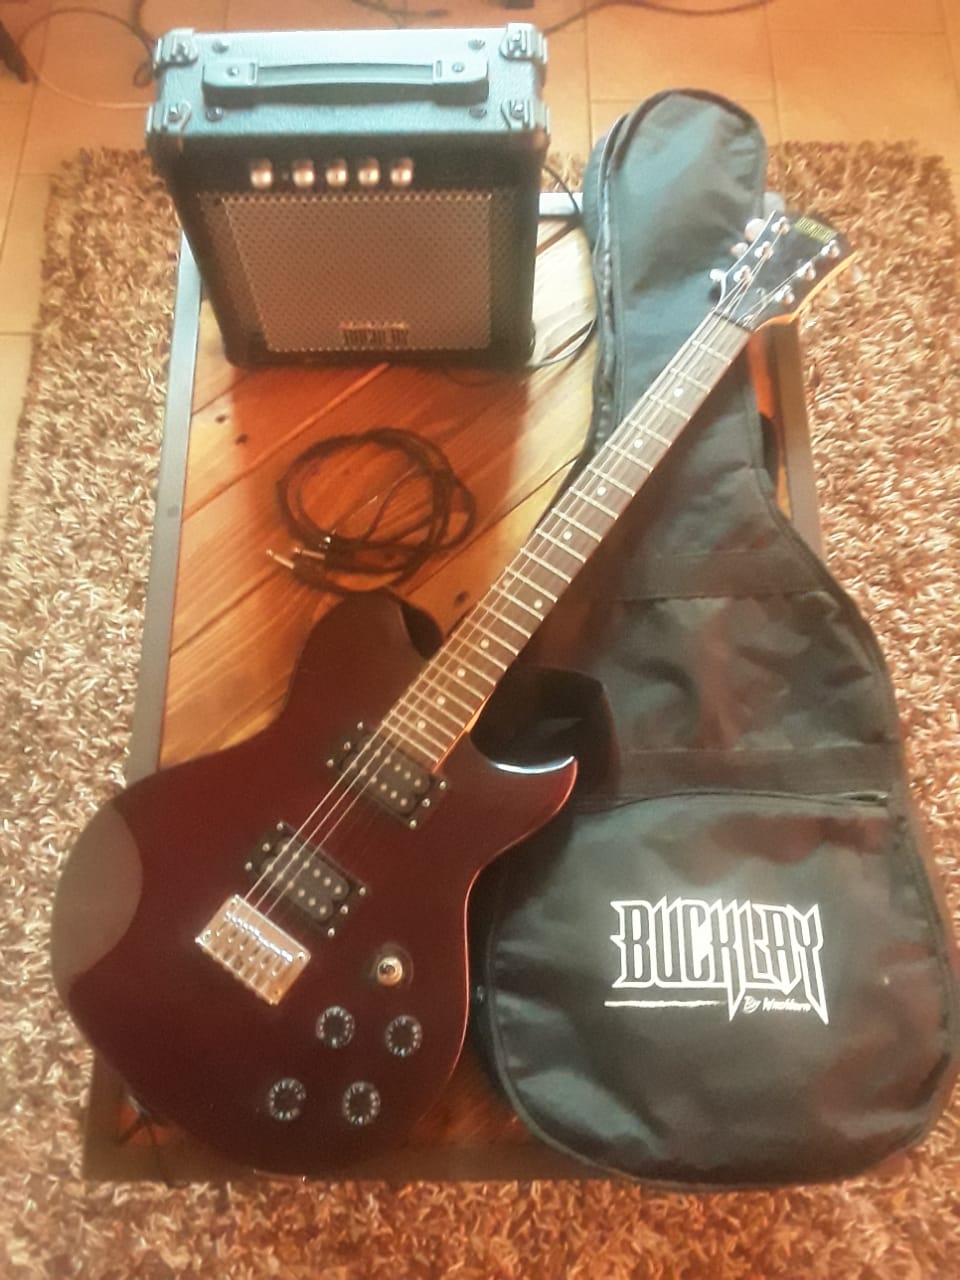 Buckley Guitar with set